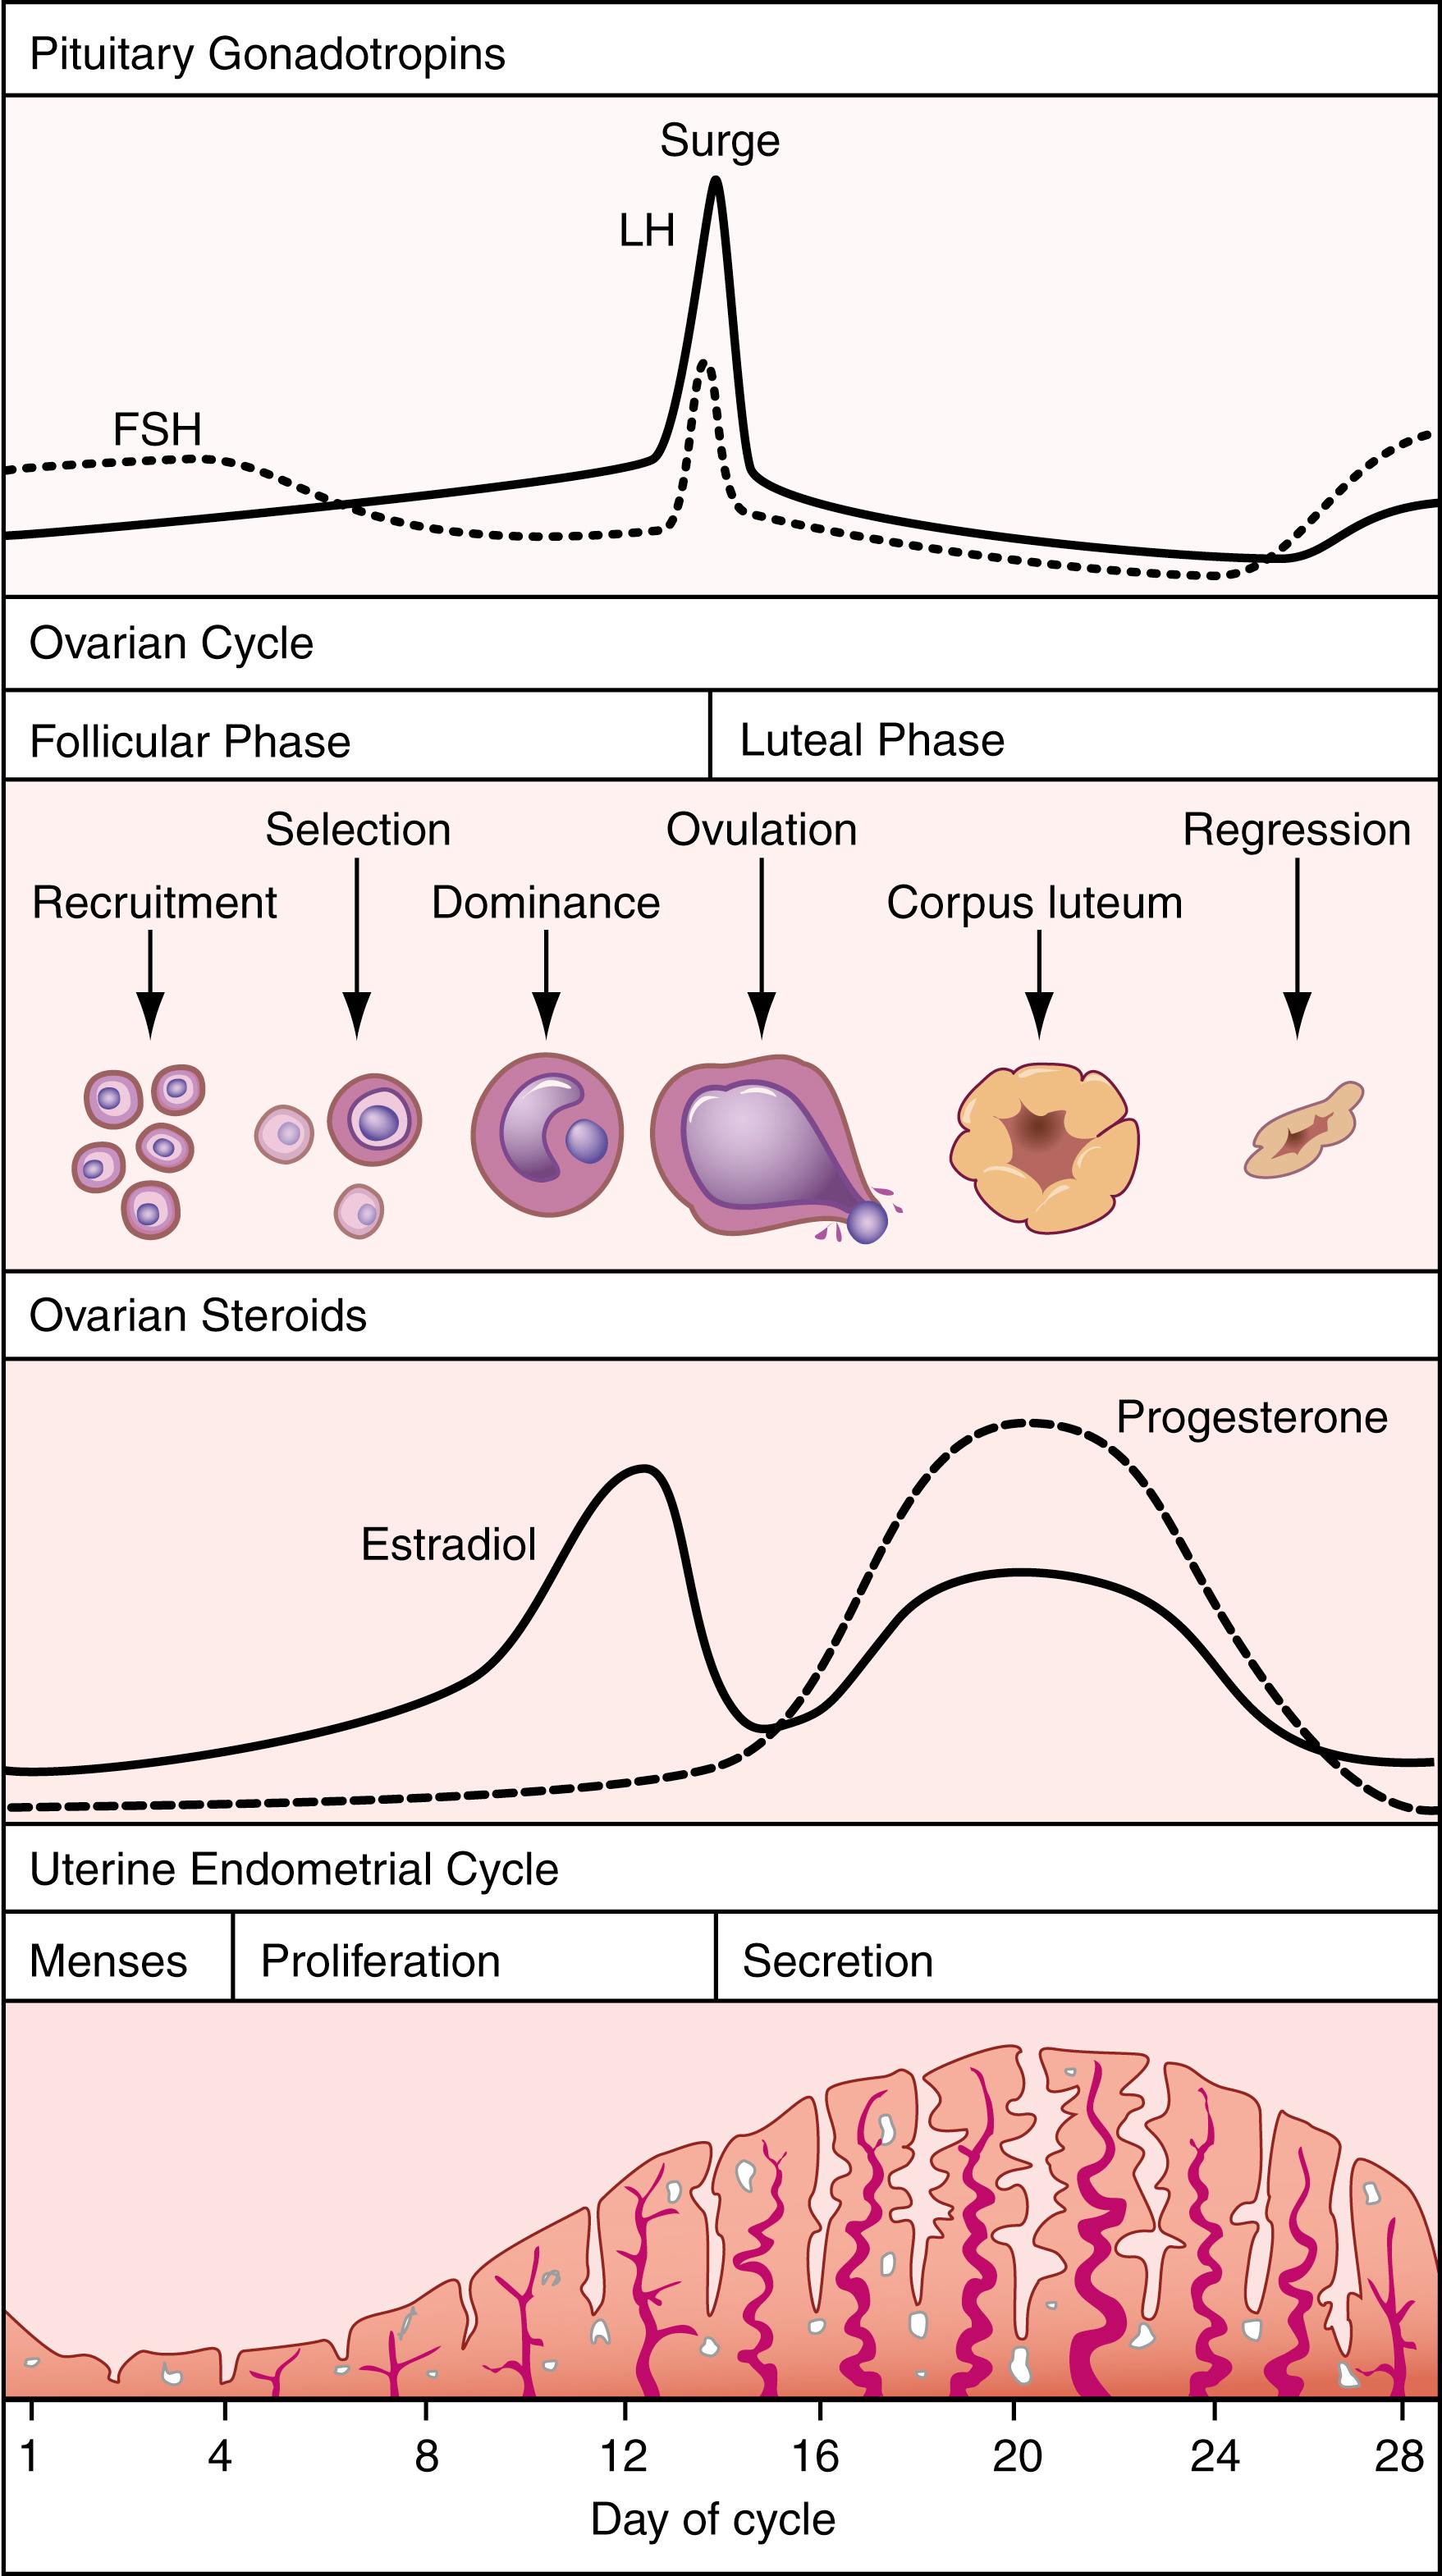 Figure 26.4, Pituitary, ovarian, and uterine changes during the human menstrual cycle. FSH , Follicle-stimulating hormone; LH, luteinizing hormone.